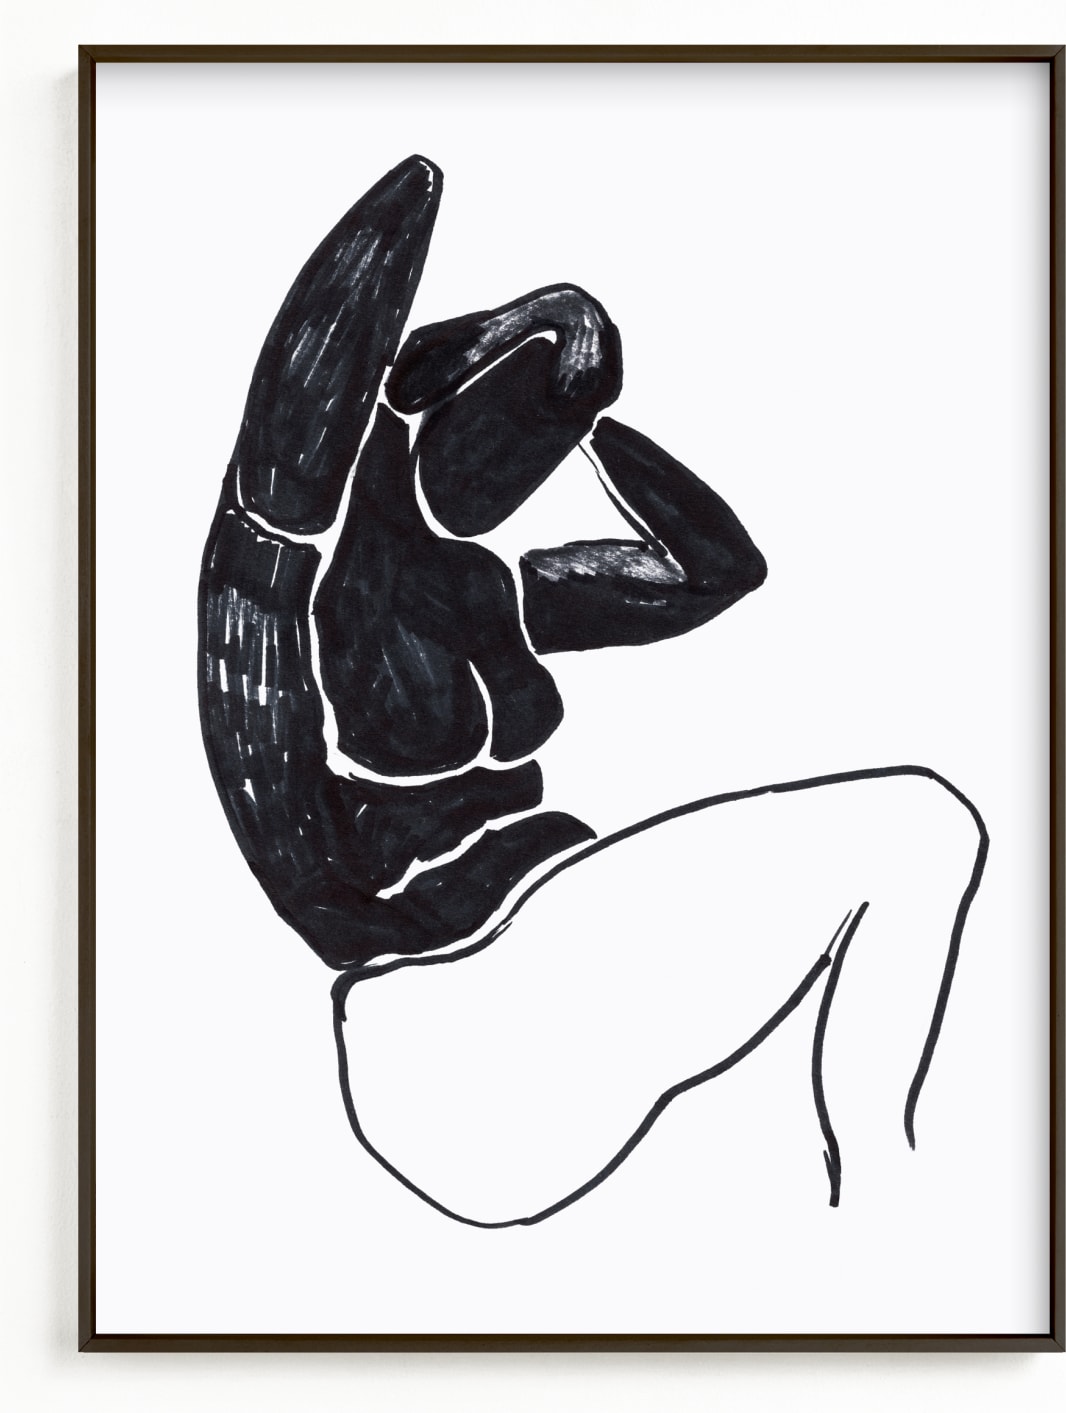 This is a white art by Oana Prints called Sitting nude.